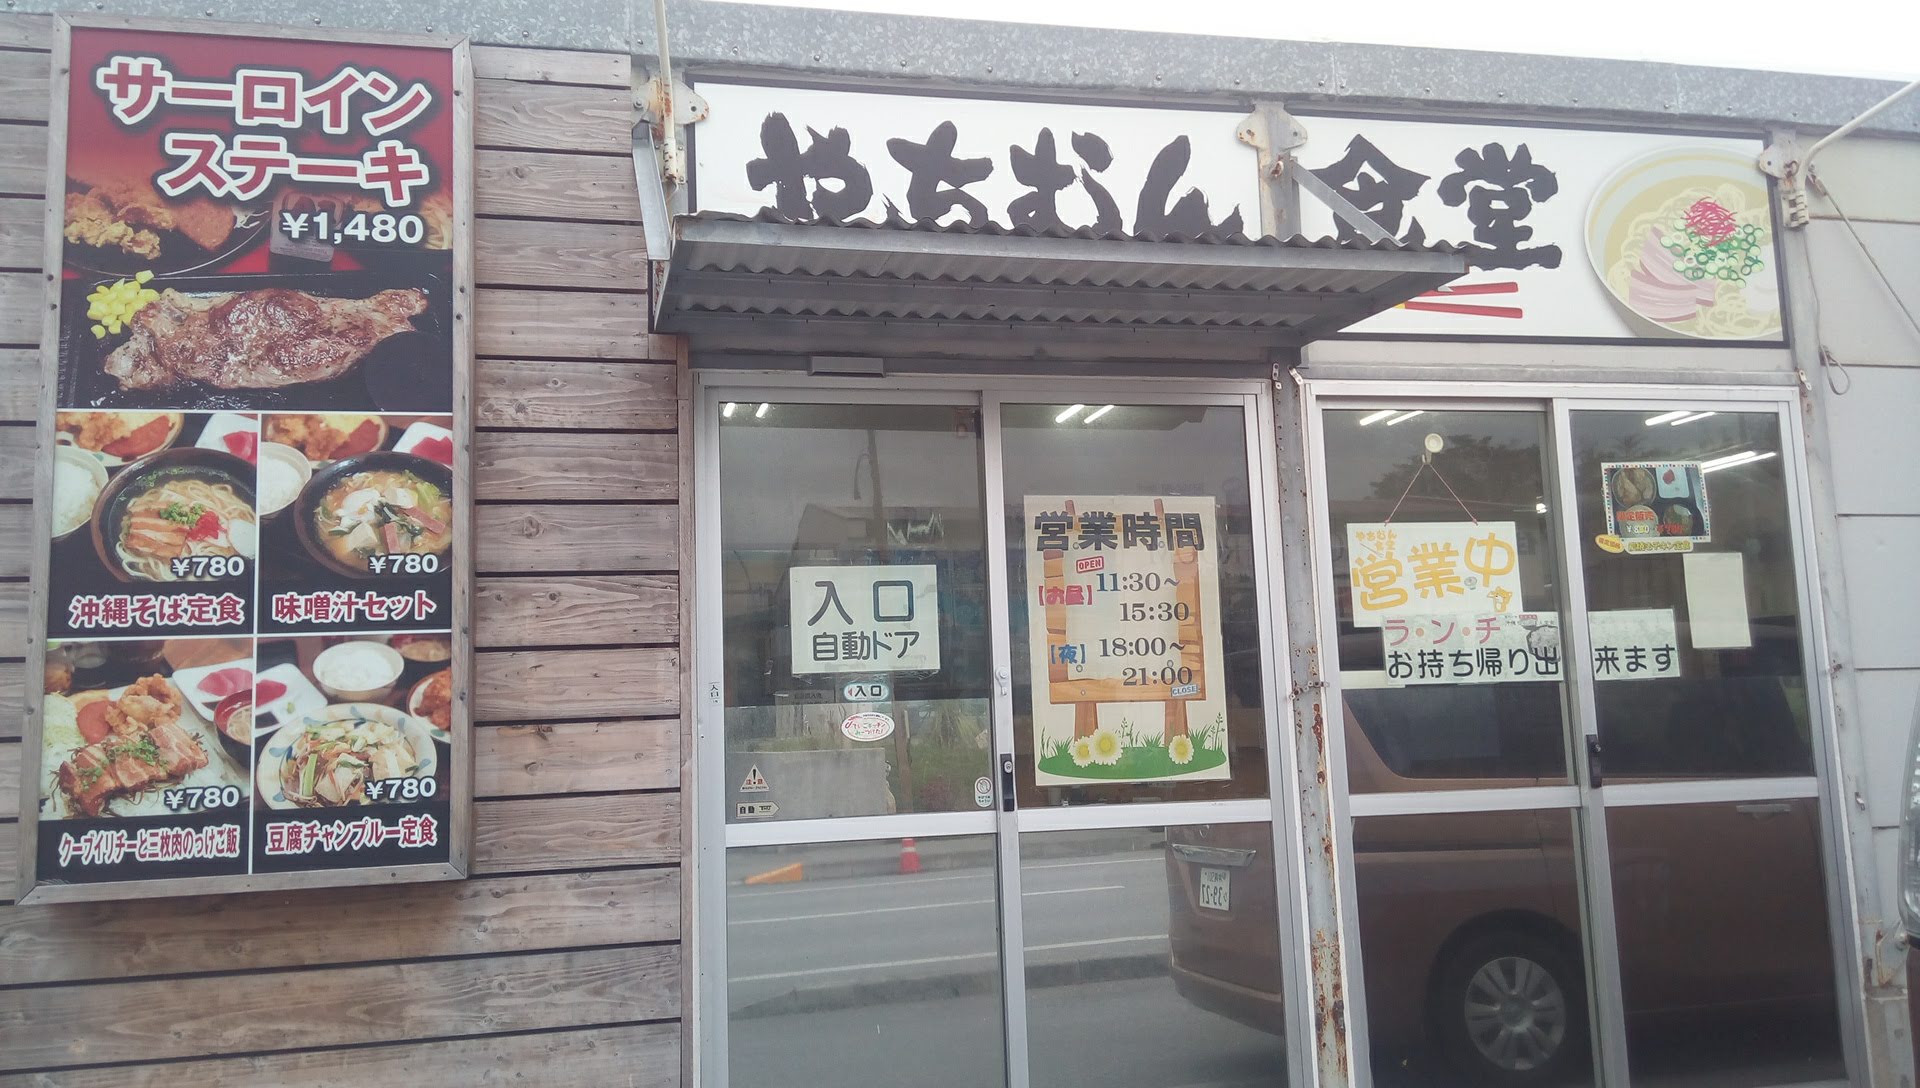 Yachimun Shokudou in Yaese town is reasonably priced and full volume